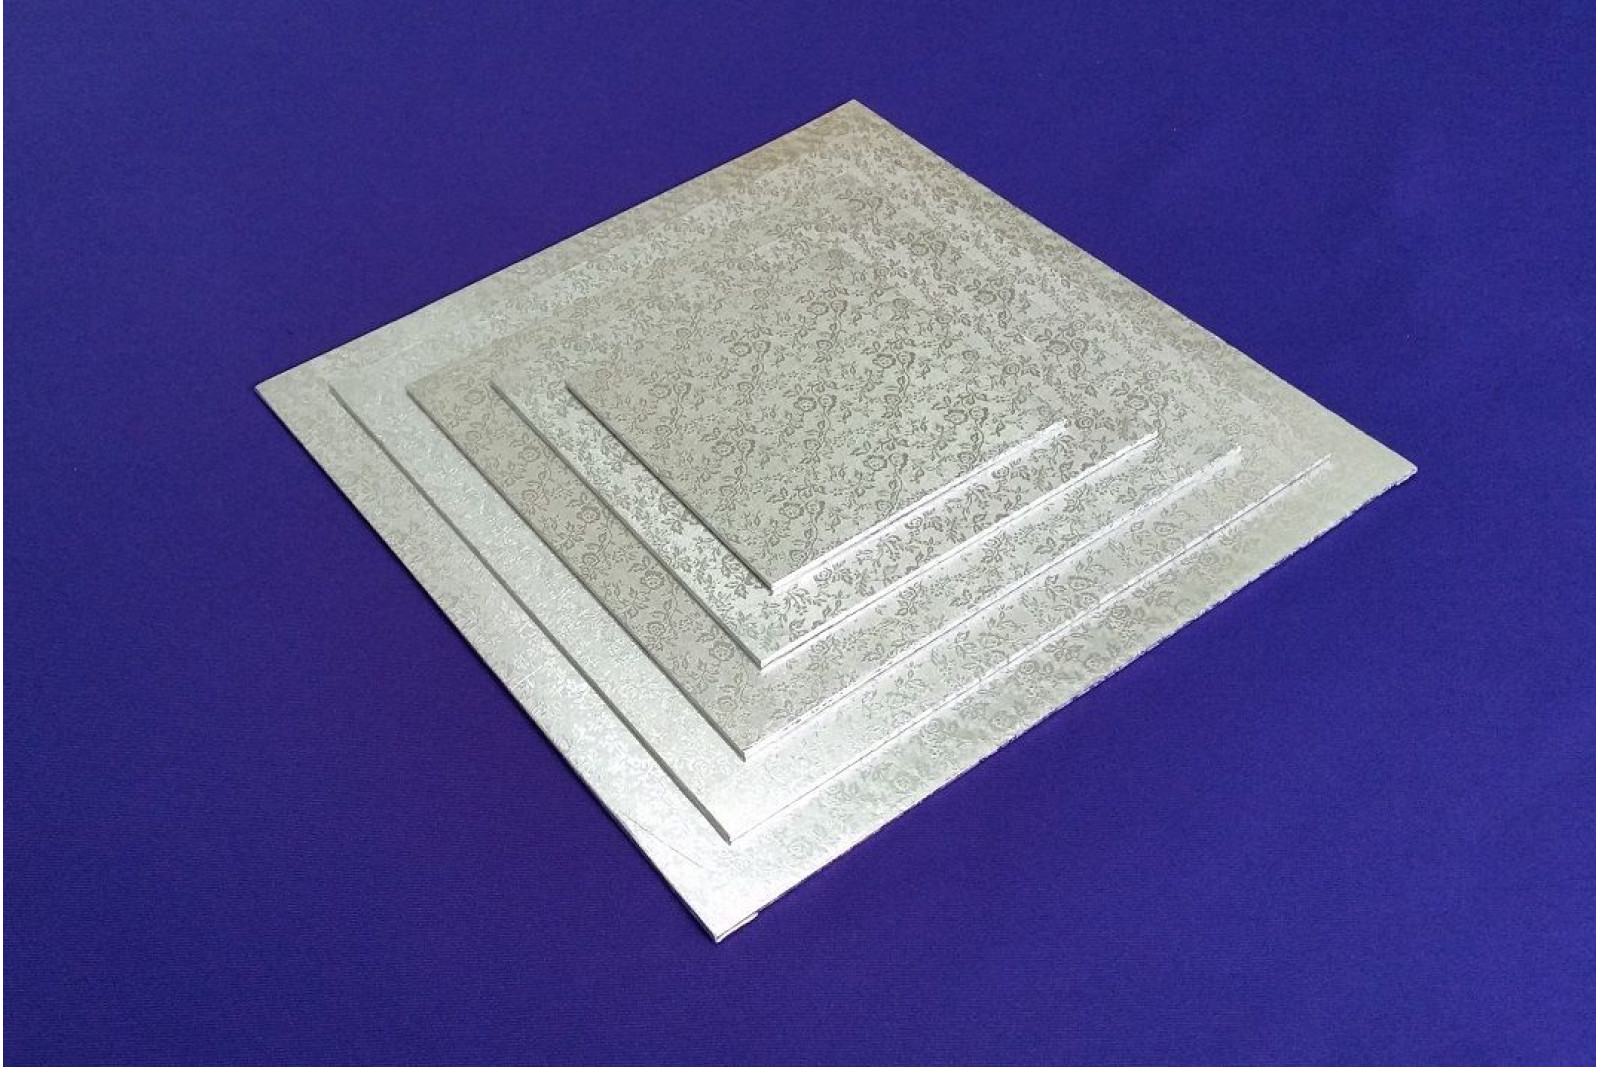 16 Inch | Silver | Square 3 mm | Cake Boards Masonite | Premium Quality | Great Christmas Bake Off